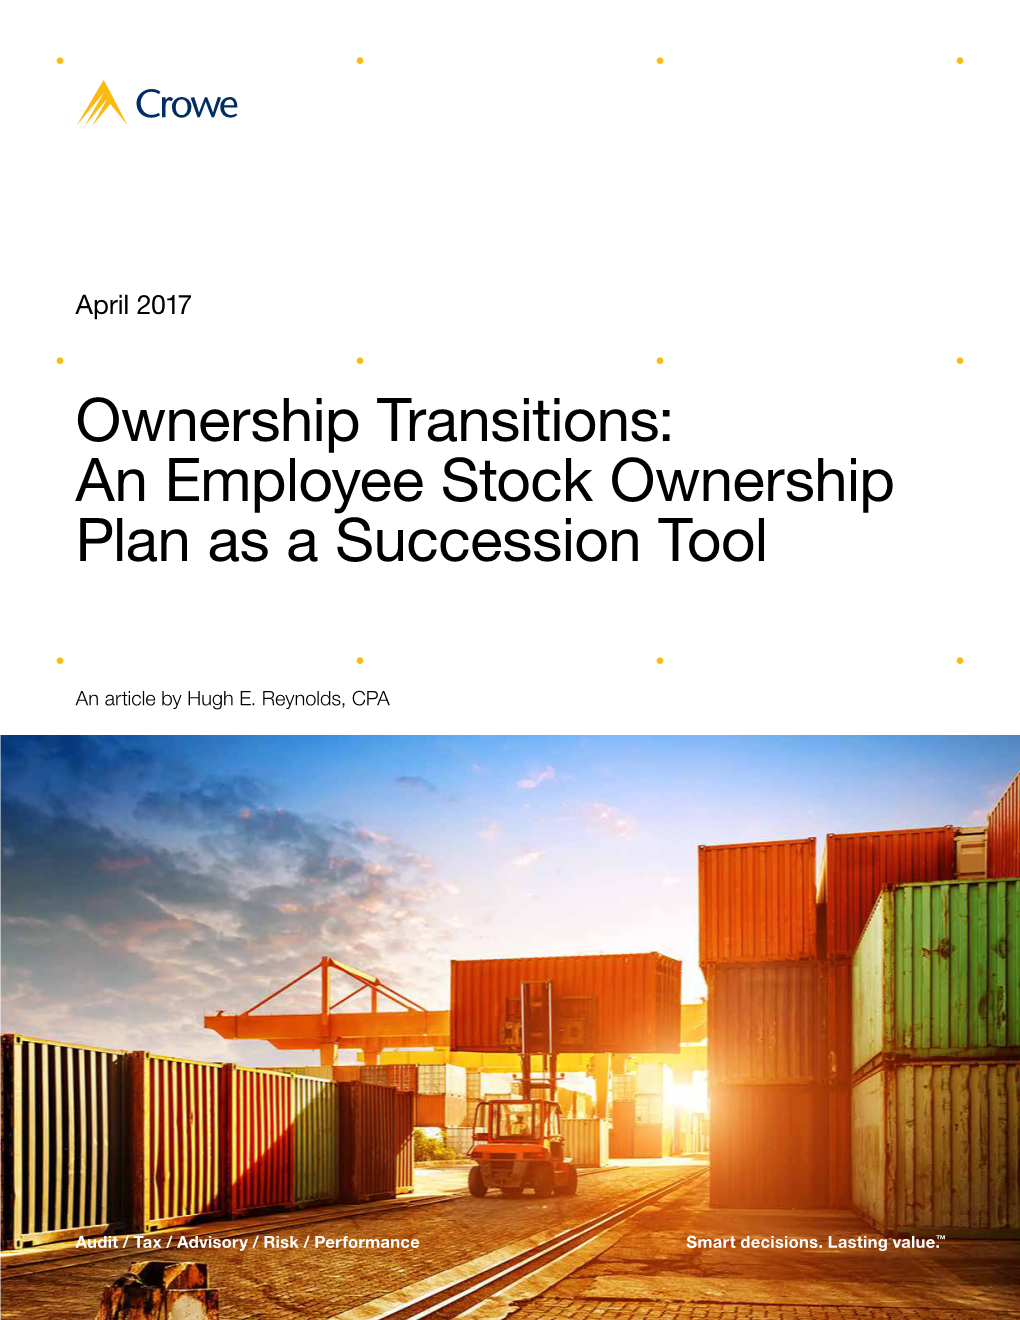 An Employee Stock Ownership Plan As a Succession Tool